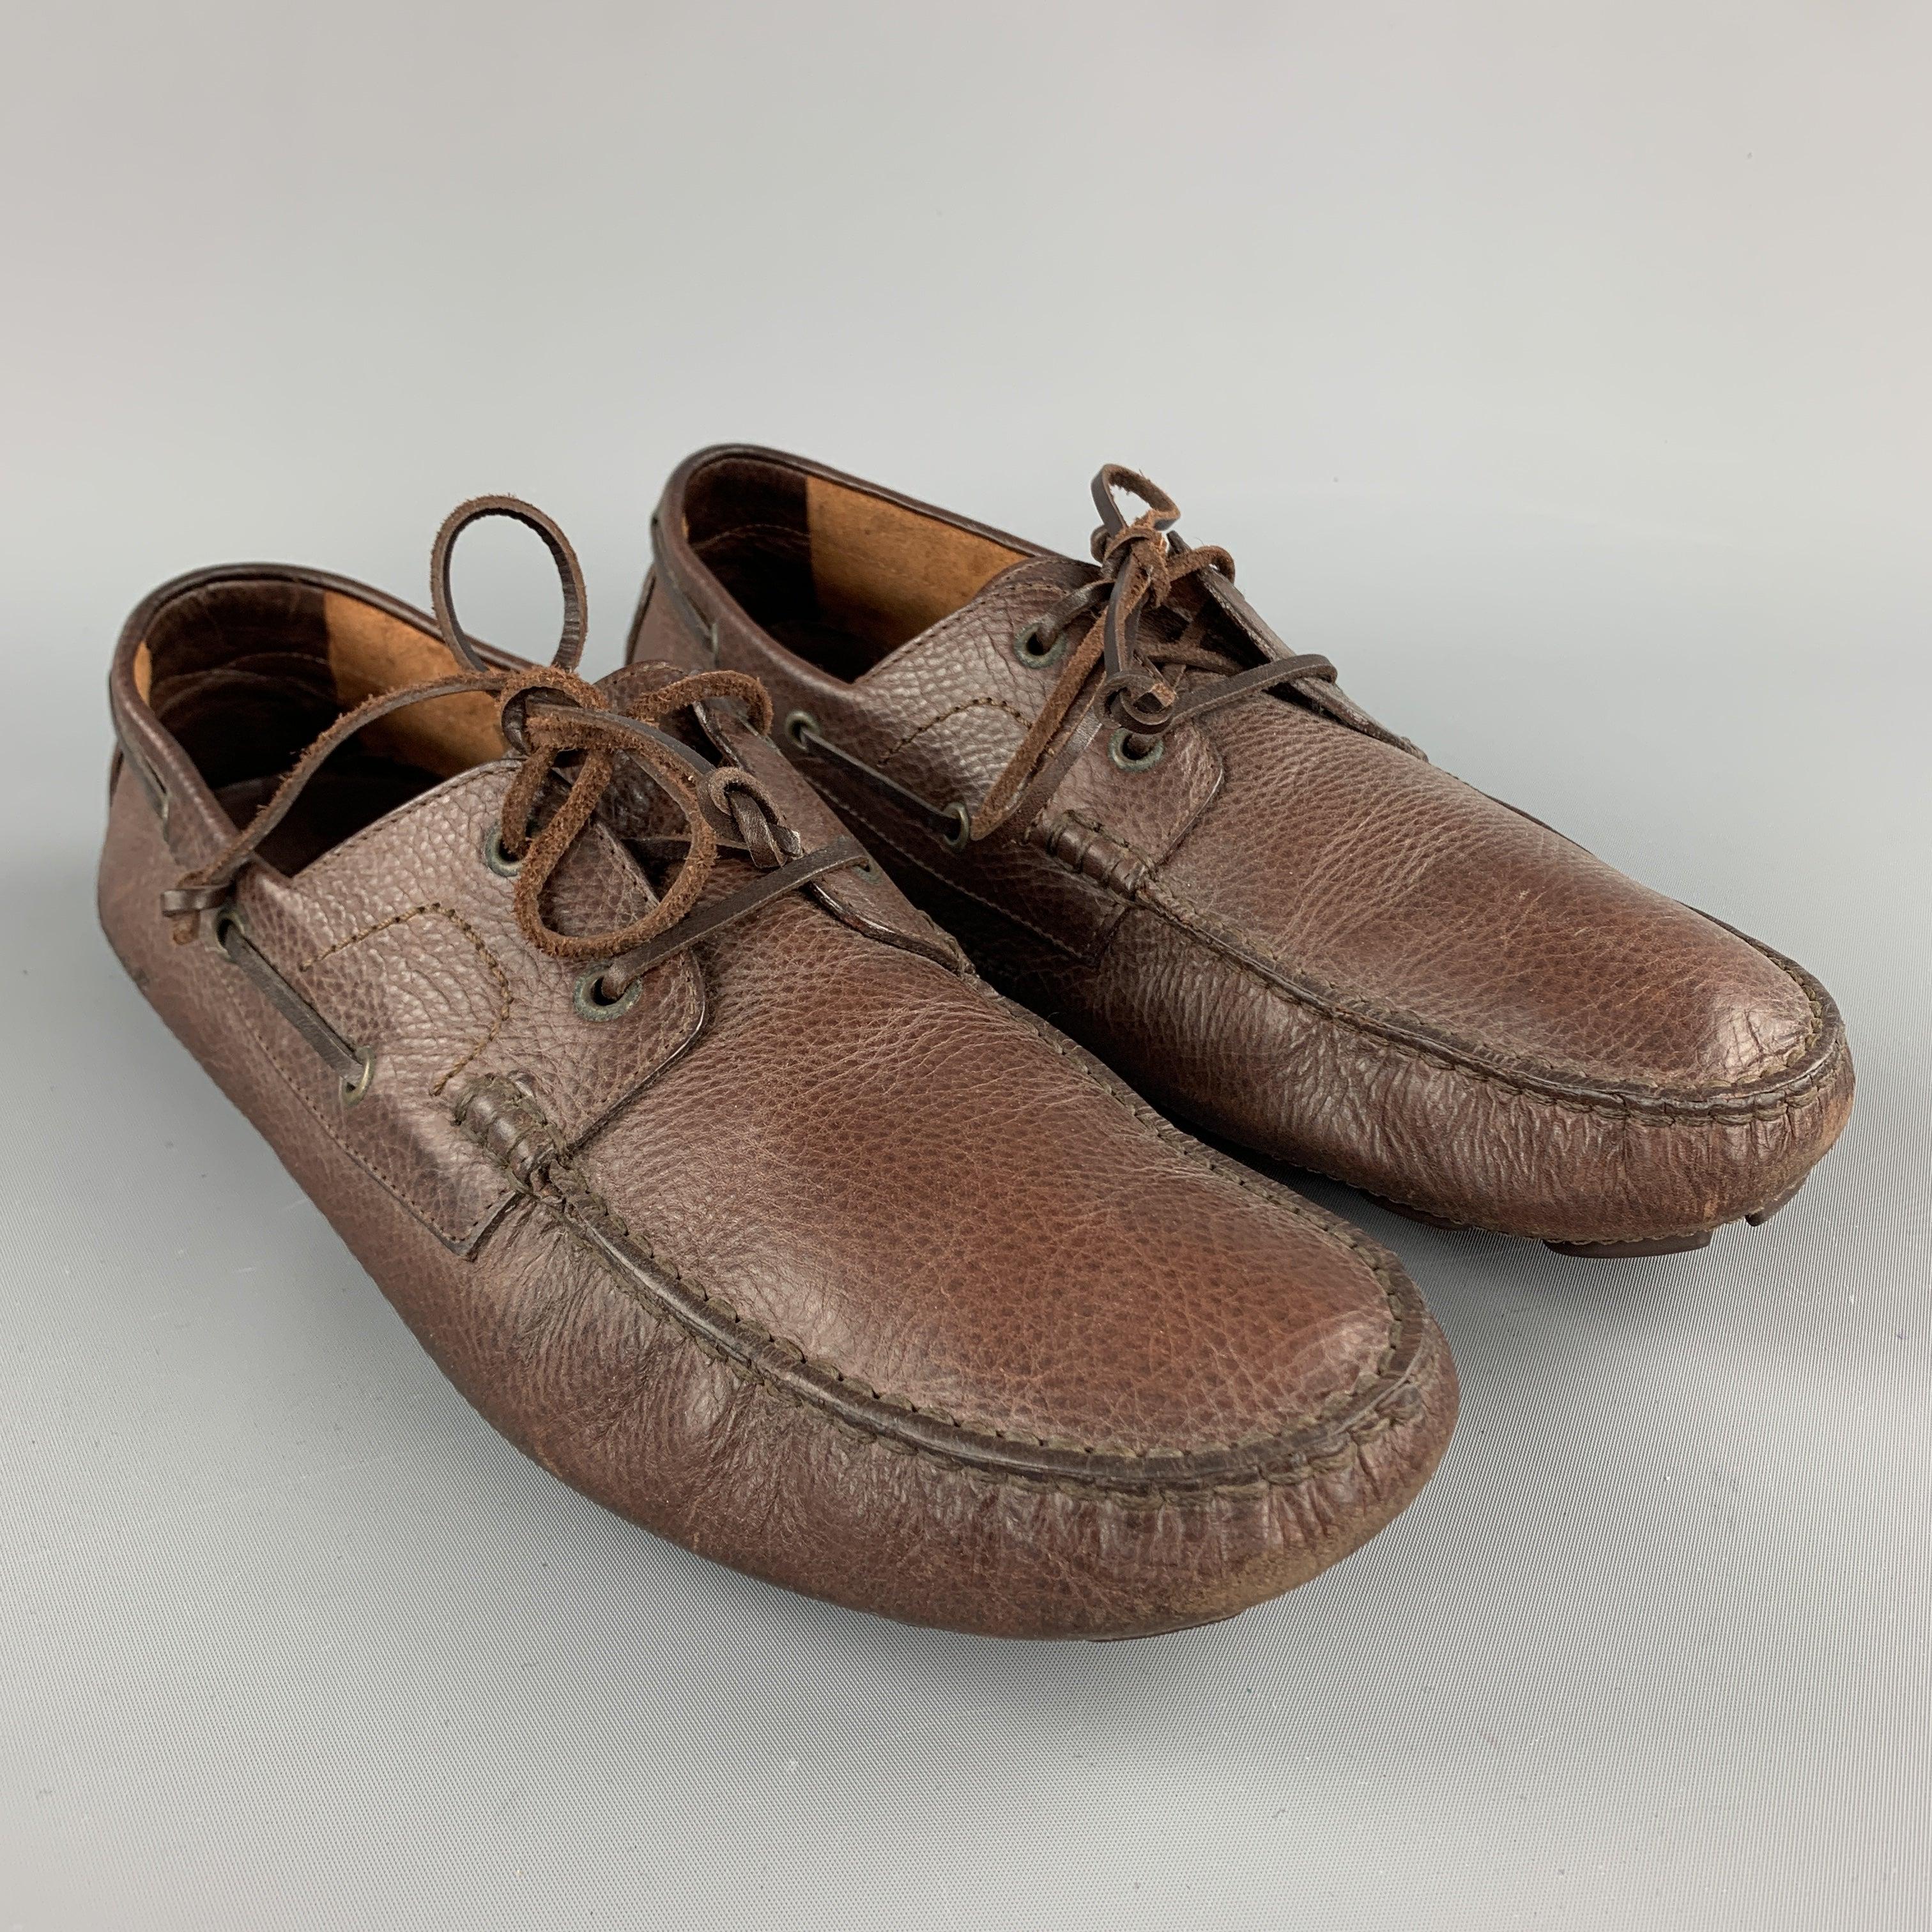 DSQUARED2 loafers come in brown leather with woven tie up front. Made in Italy.Excellent
Pre-Owned Condition. 

Marked:   IT 43Outsole: 11.75 x 3.5 inches 
  
  
 
Reference: 100958
Category: Loafers
More Details
    
Brand:  DSQUARED2
Size: 